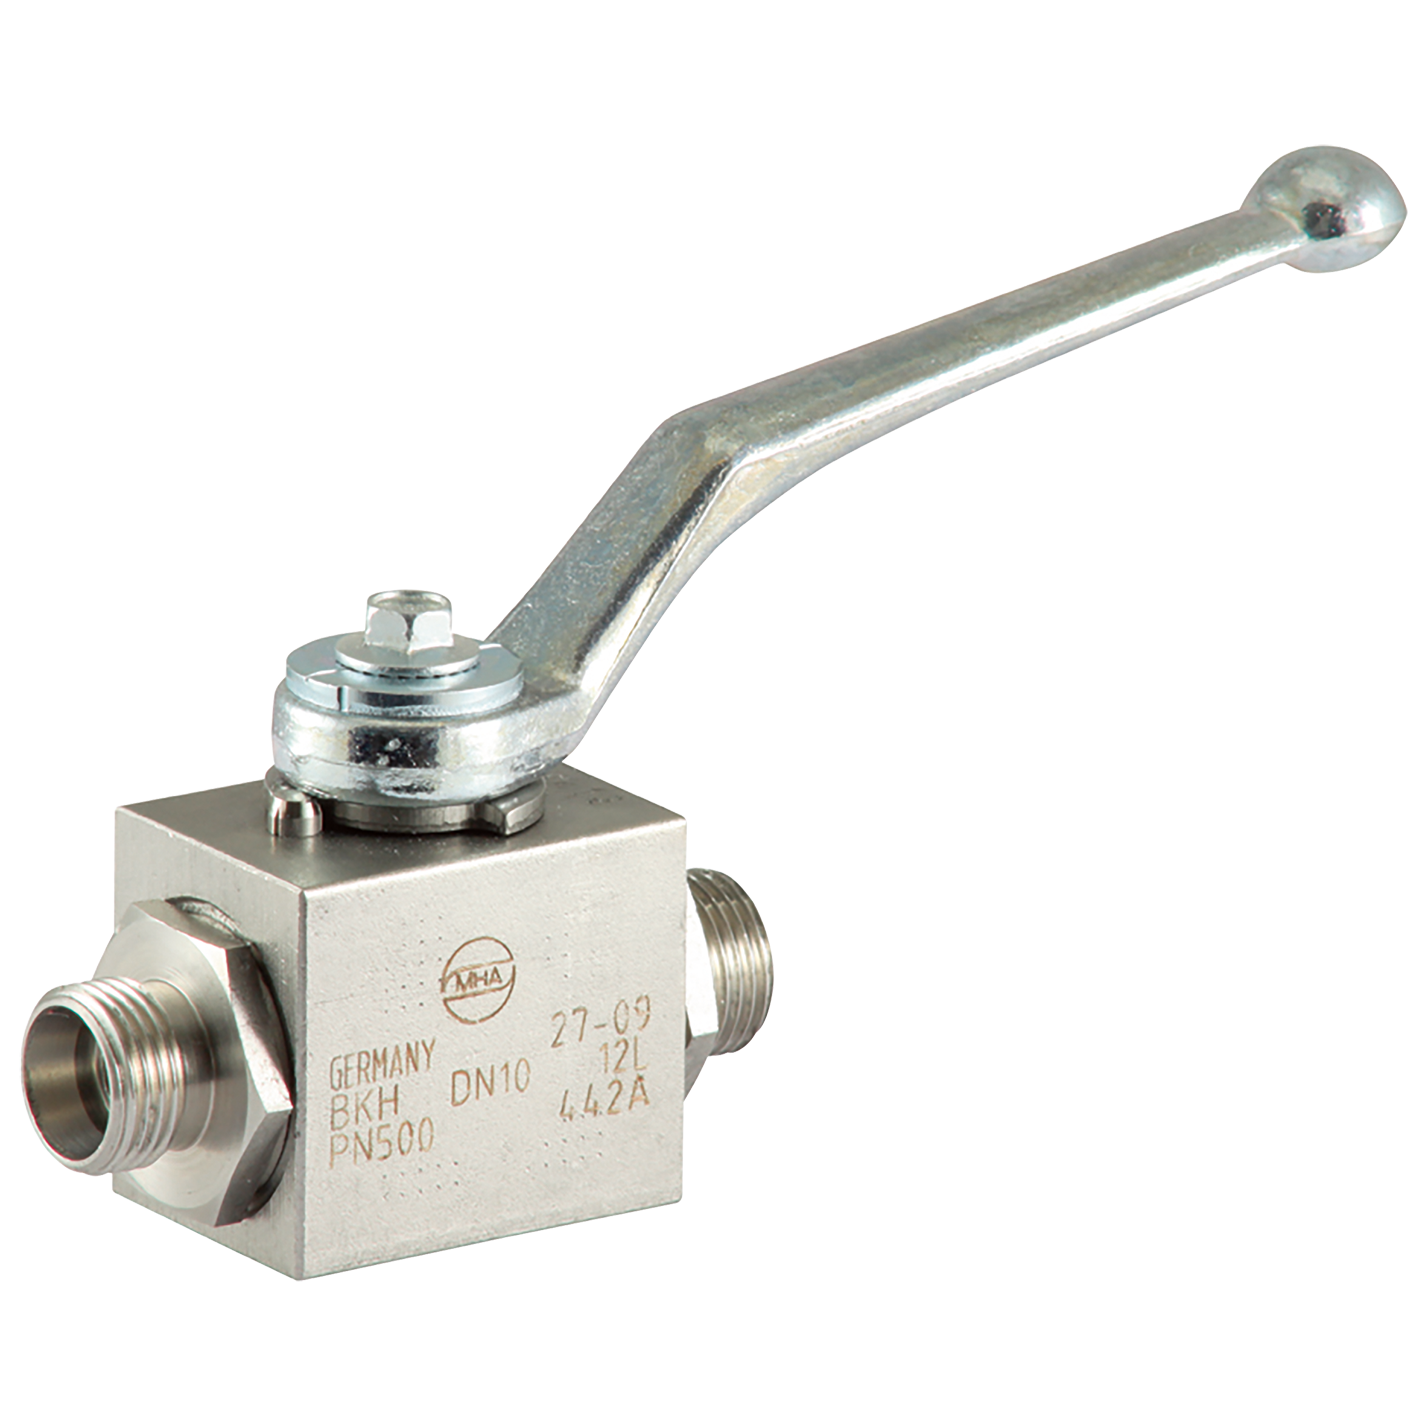 Providers of Industrial Valves For Hydraulics